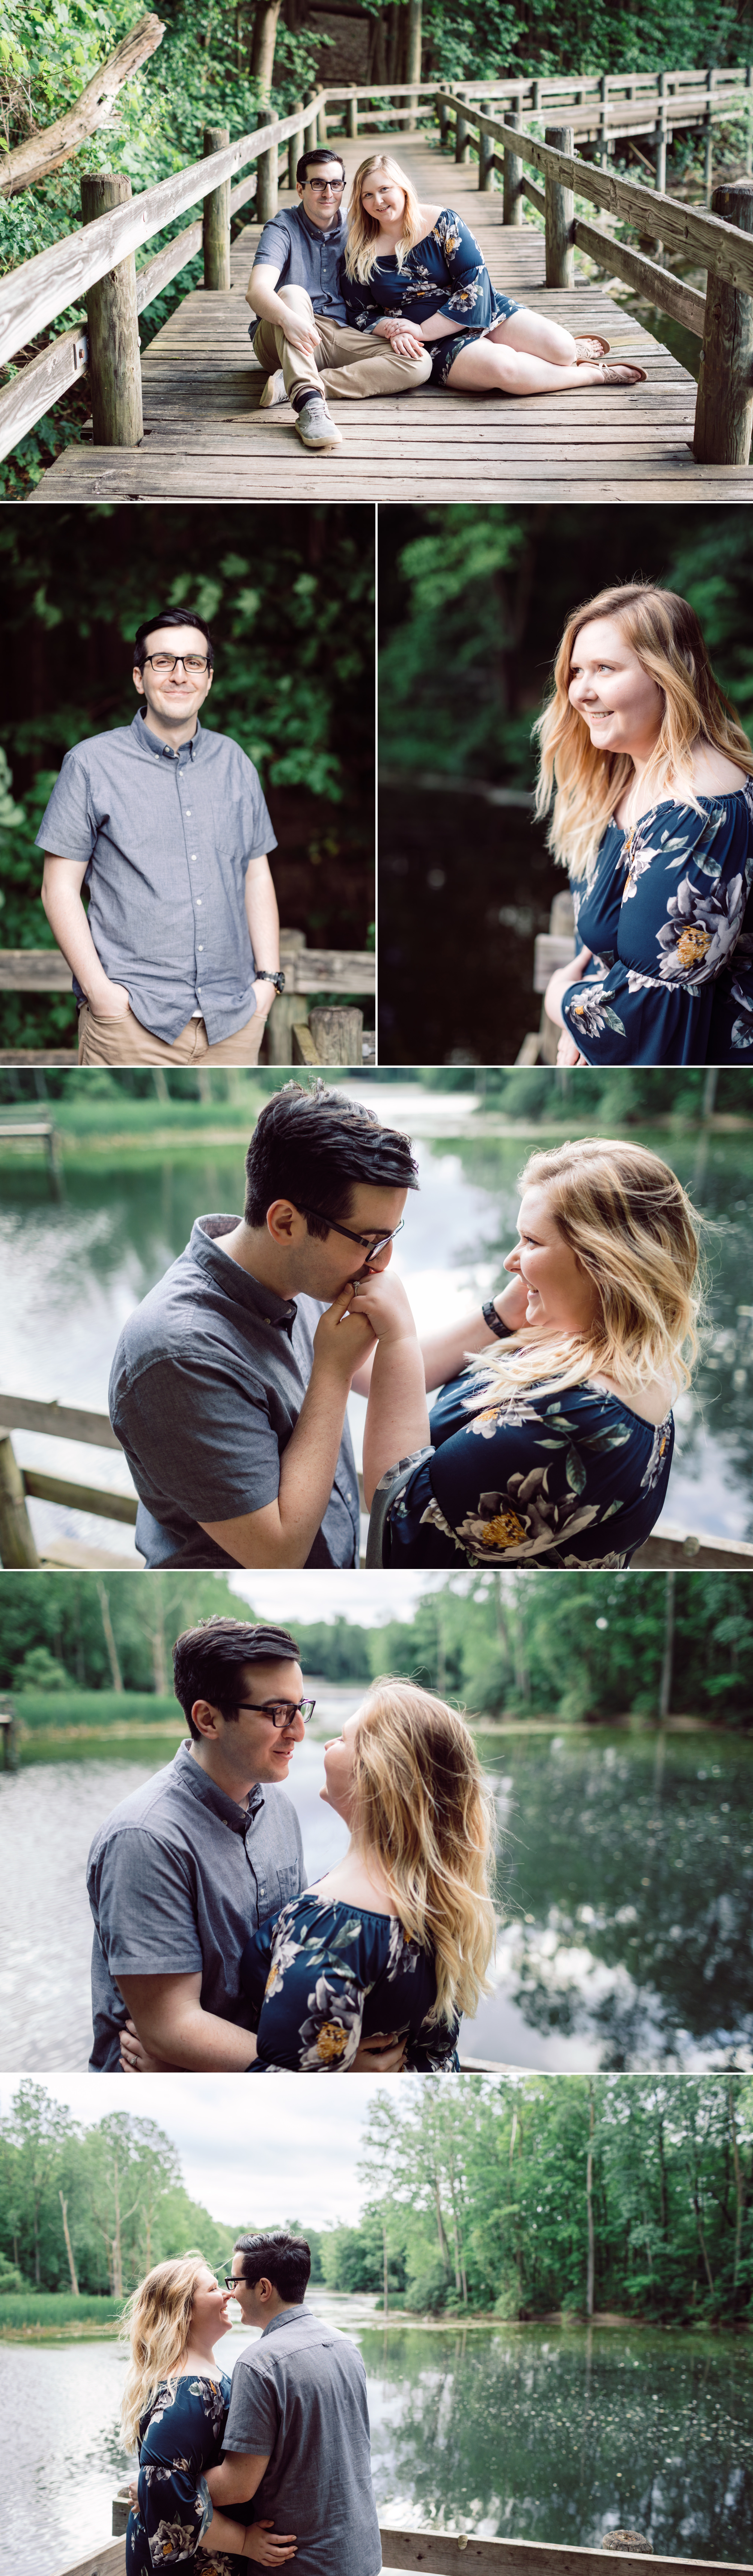 engagement photographer captures individual and romantic poses of couple at Maybury State Park in Detroit